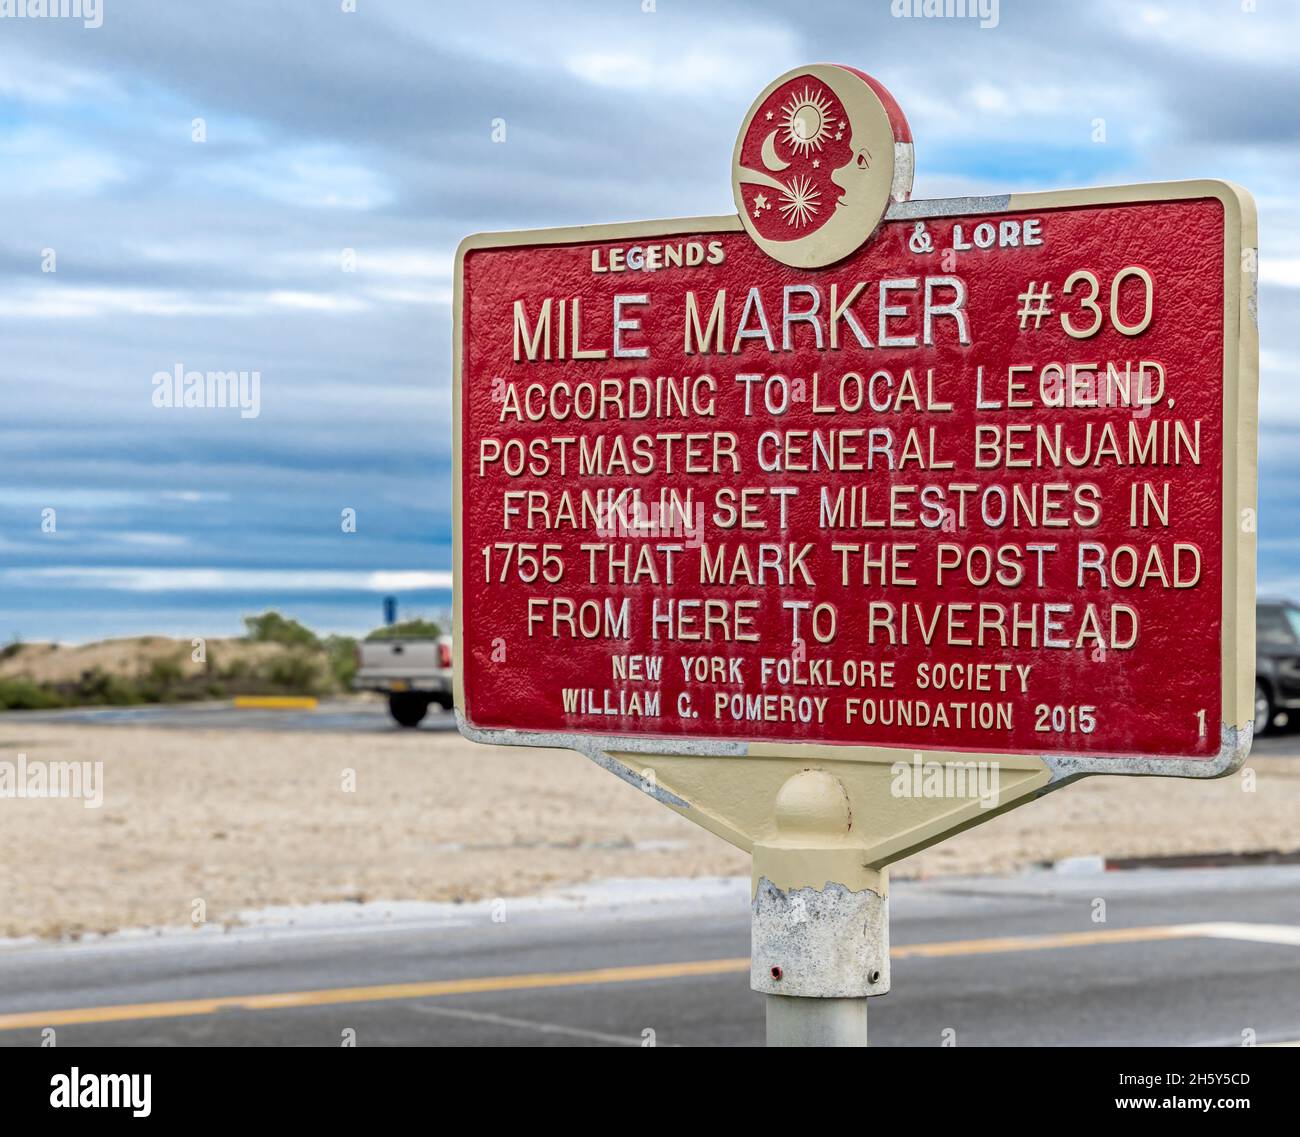 Mile Marker number 30, Orient Point, Long Island, NY Stock Photo